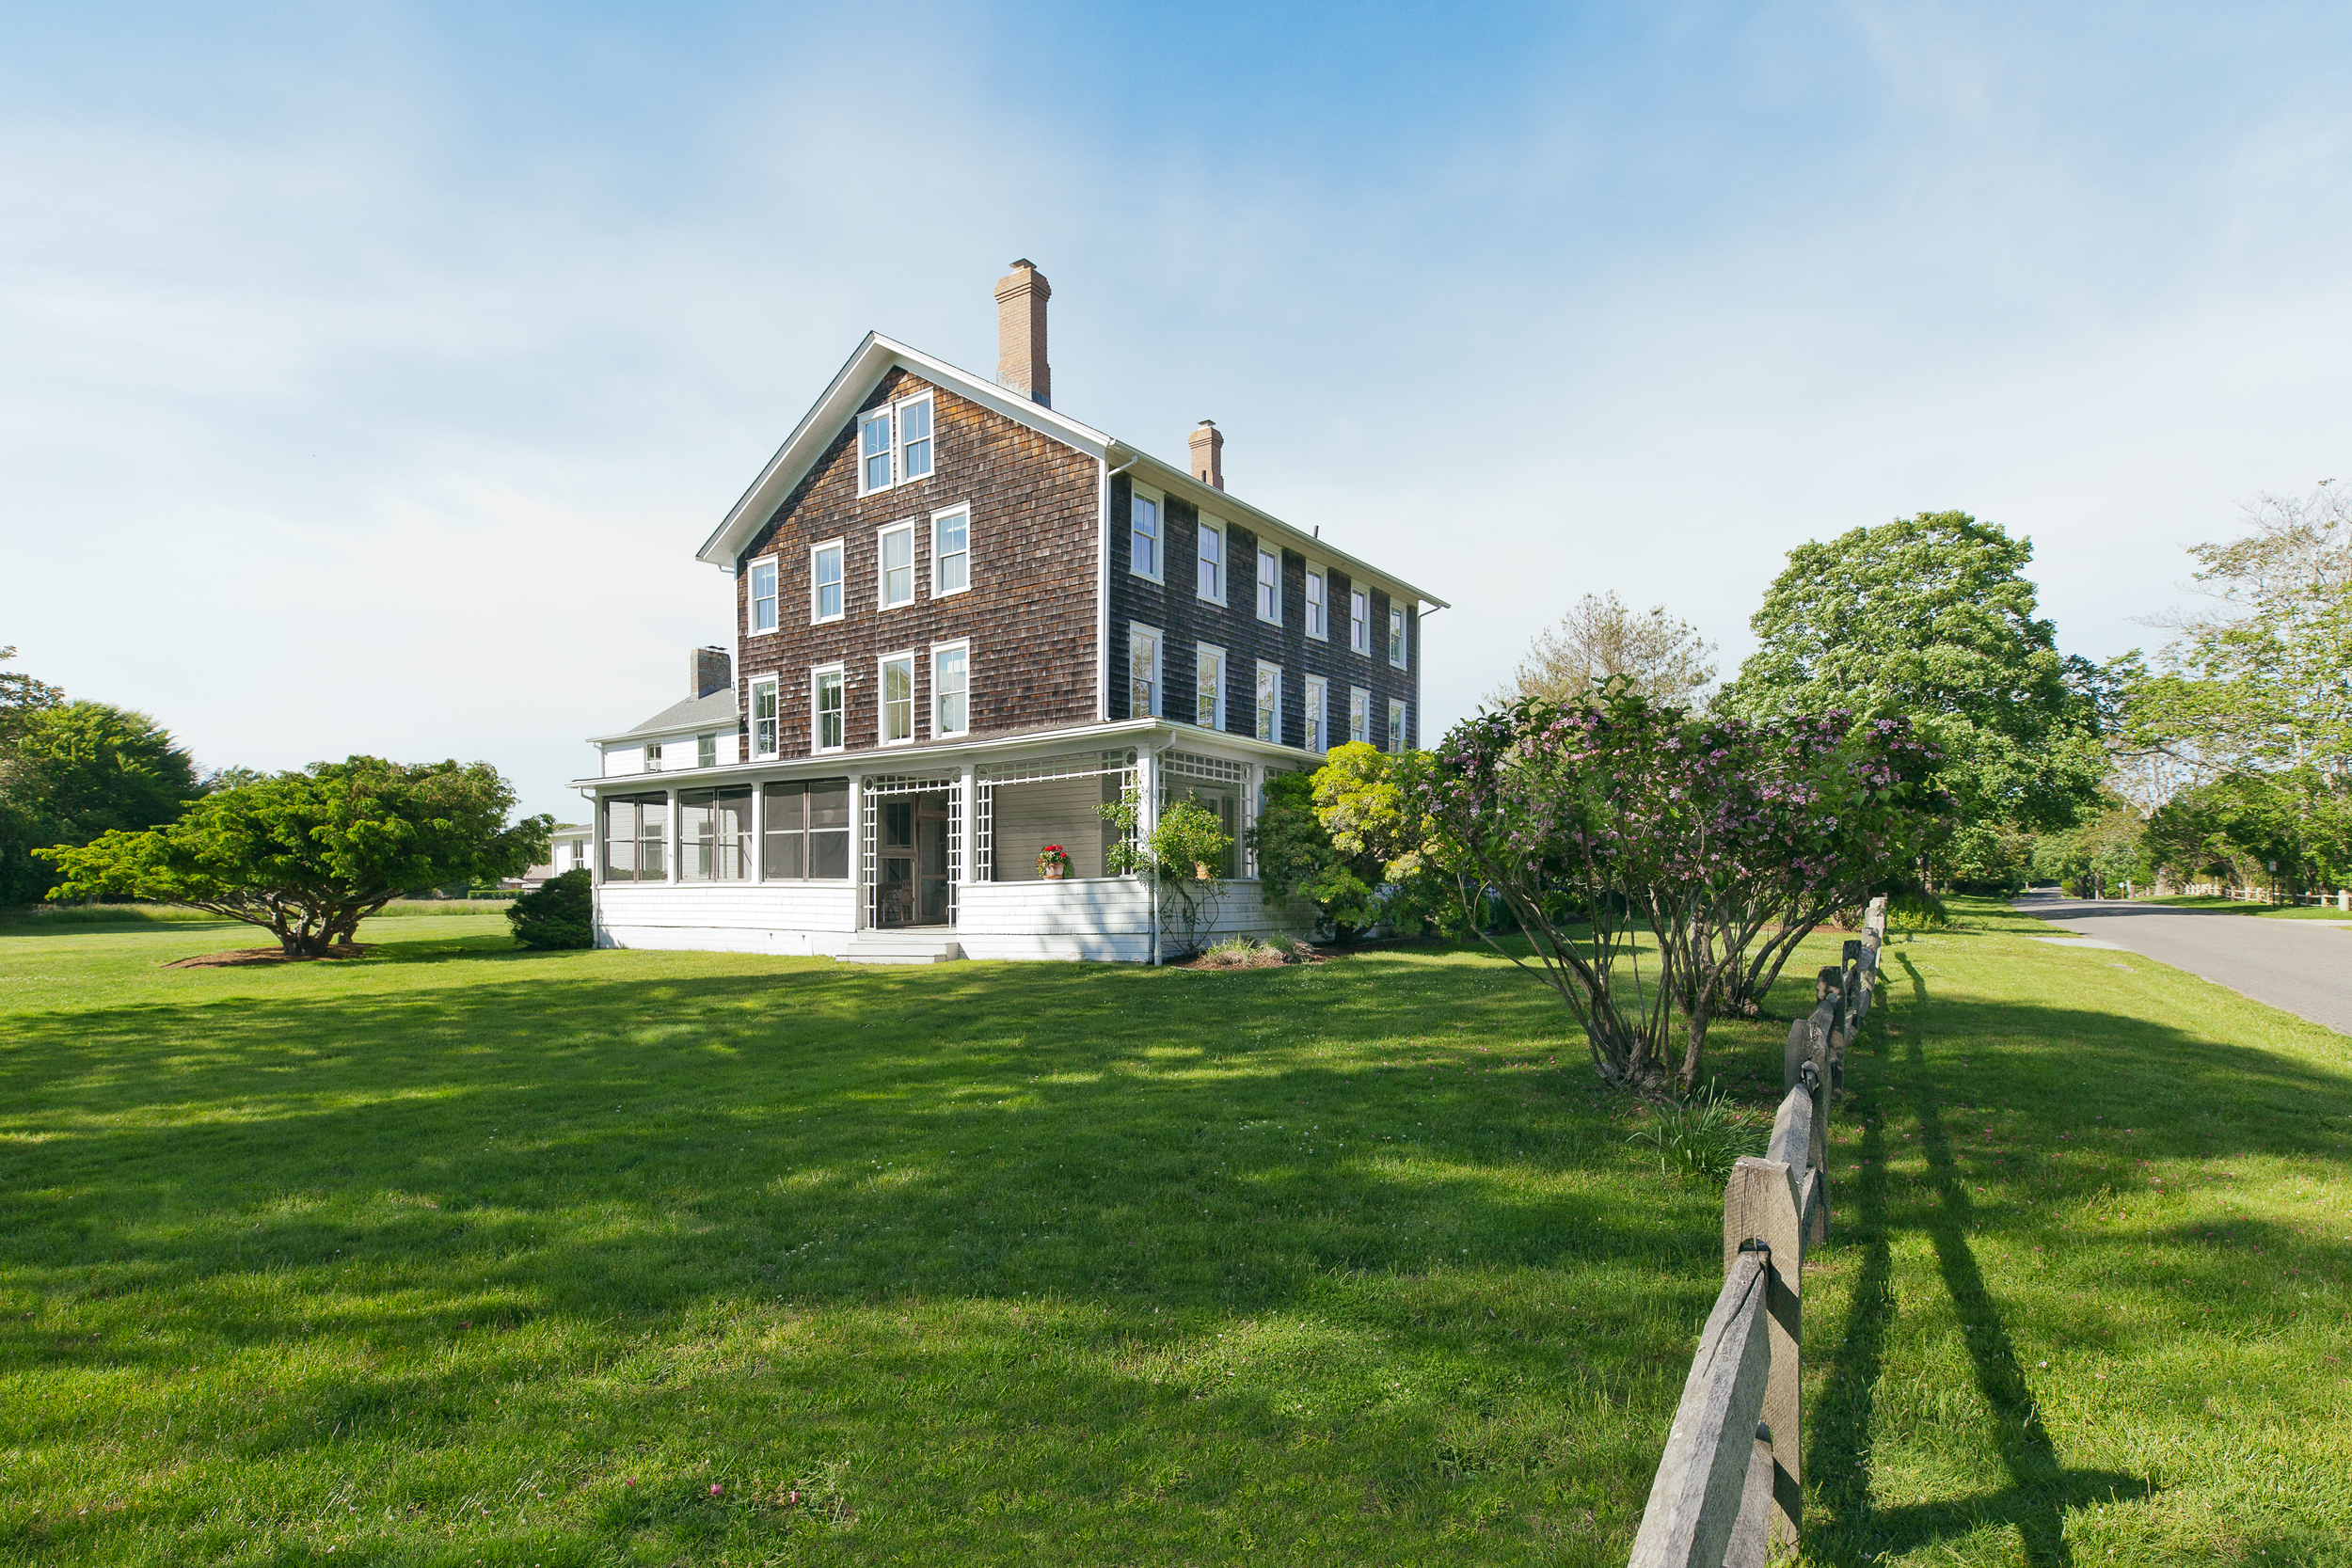 72 Apaquogue Road, East Hampton. JAIME LOPEZ FOR SOTHEBY'S INTERNATIONAL REALTY